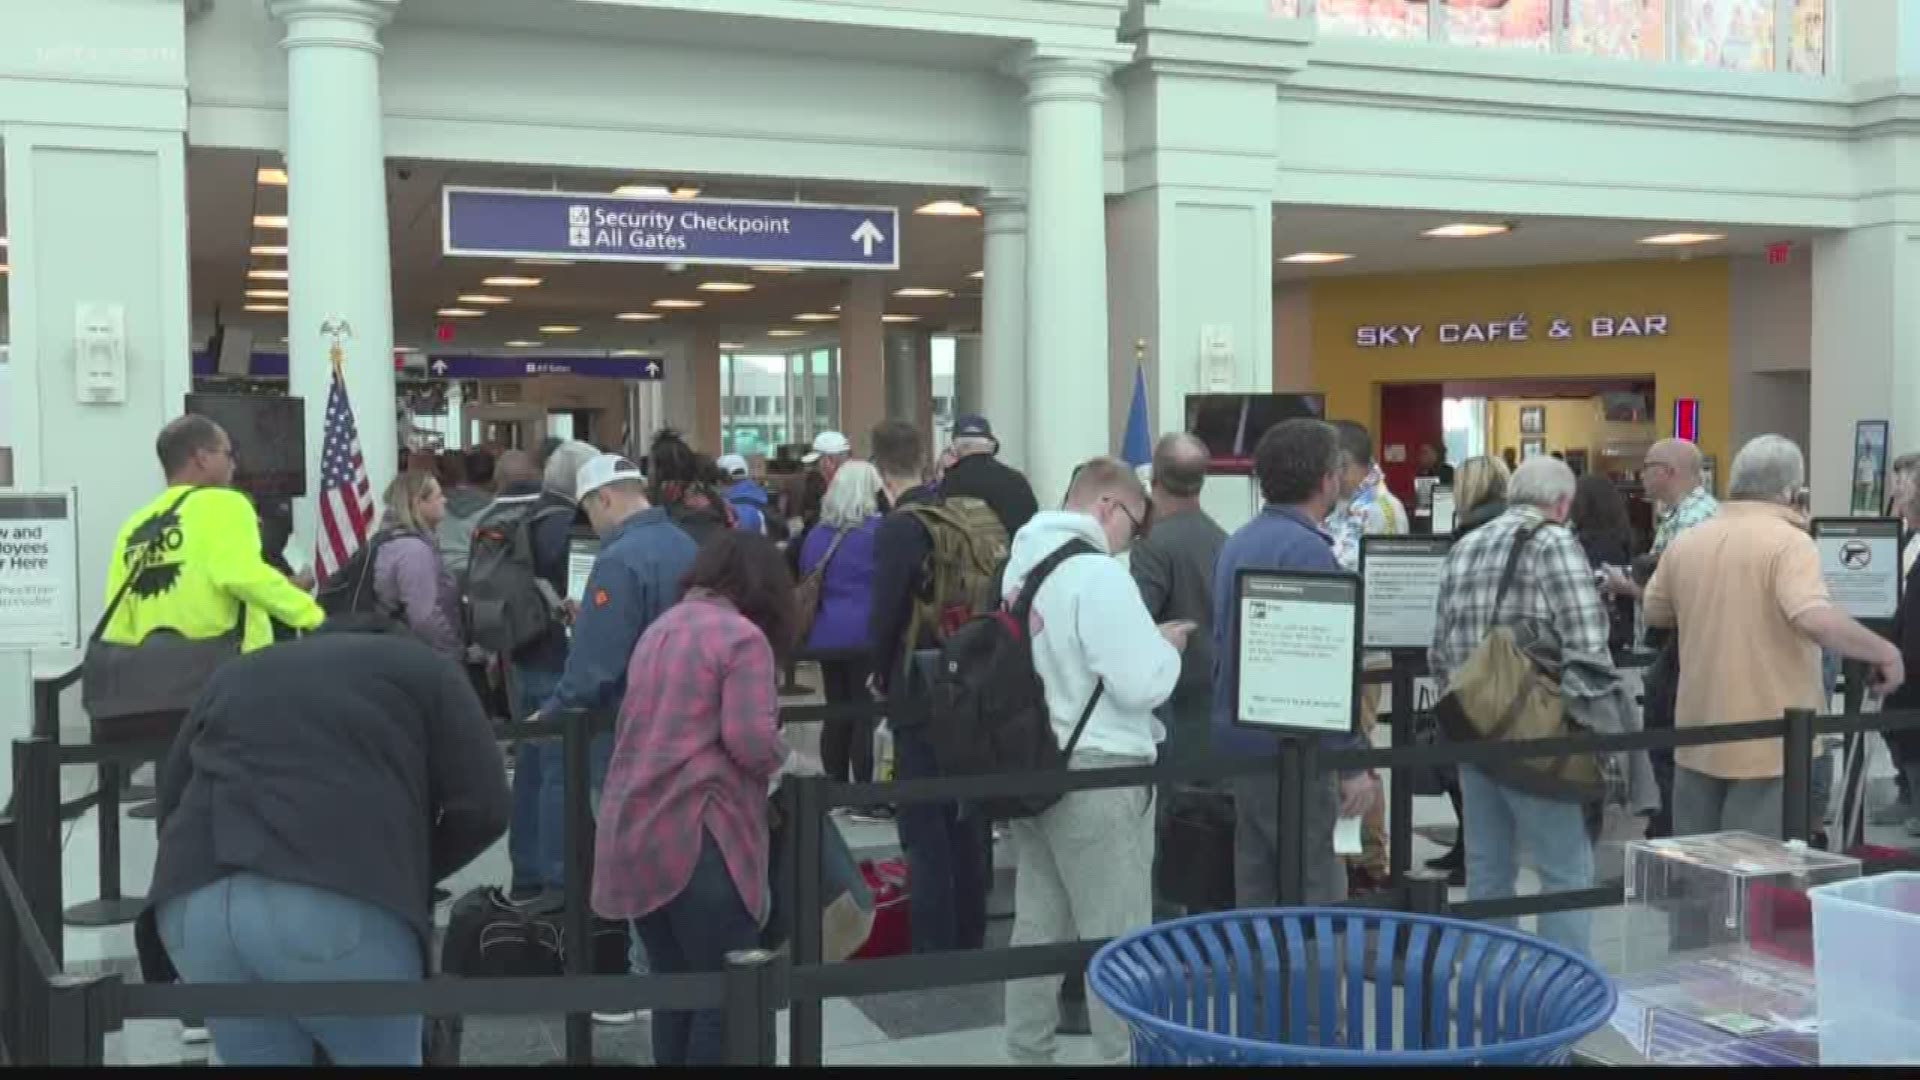 The airport saw a 15 percent increase in traffic, and set a new record for the weekend after Thanksgiving.